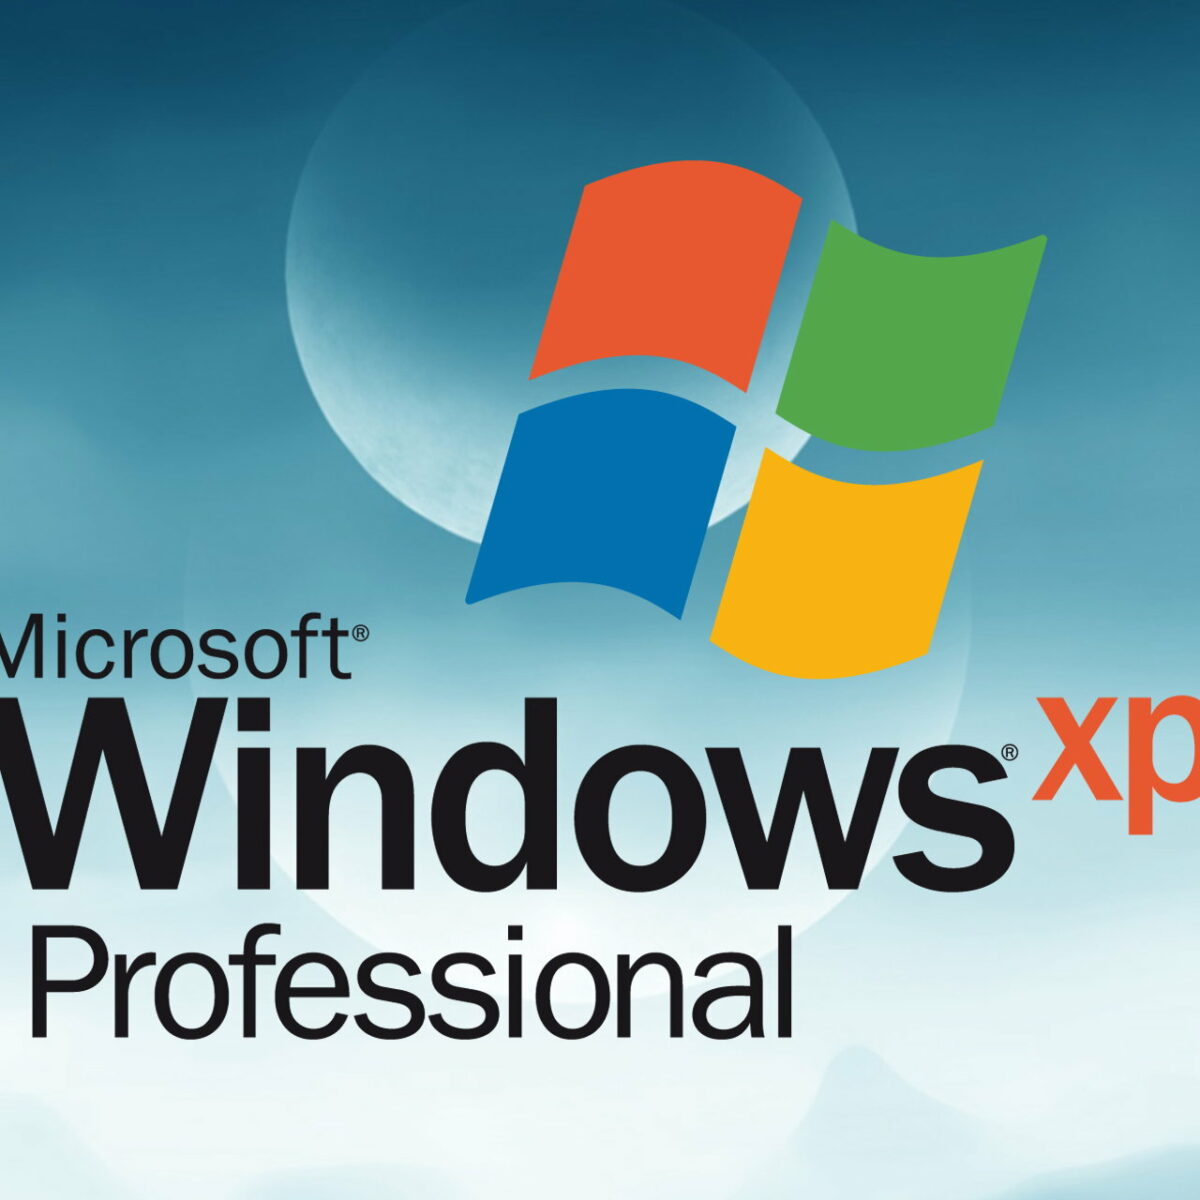 5 PC optimization software for Windows XP to use in 2020